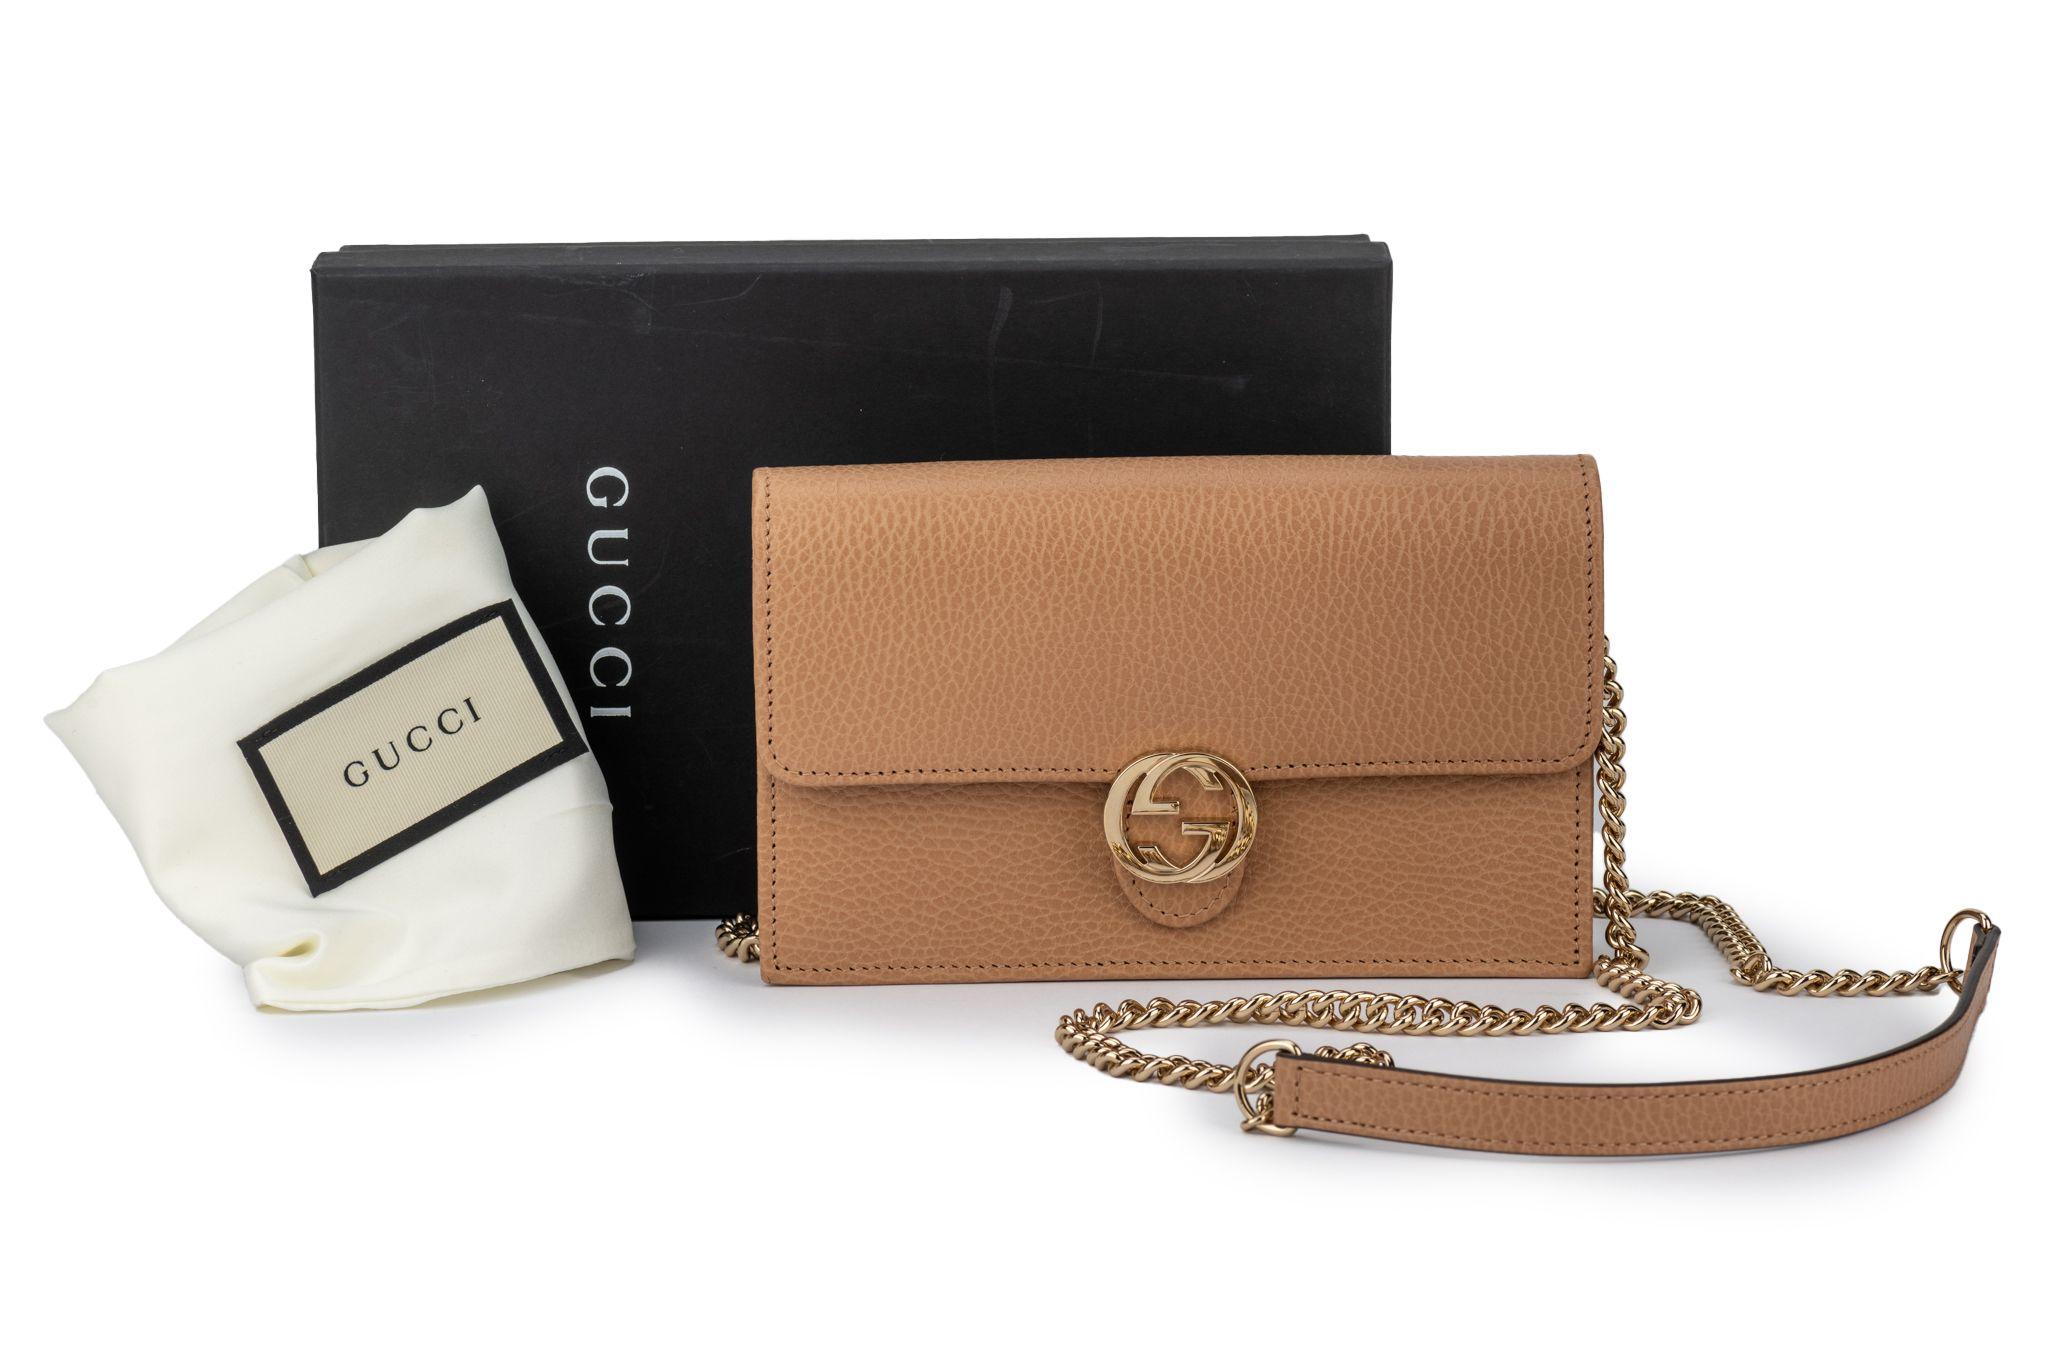 Gucci New Camel Leather Cross Body/Clutch Bag For Sale 11